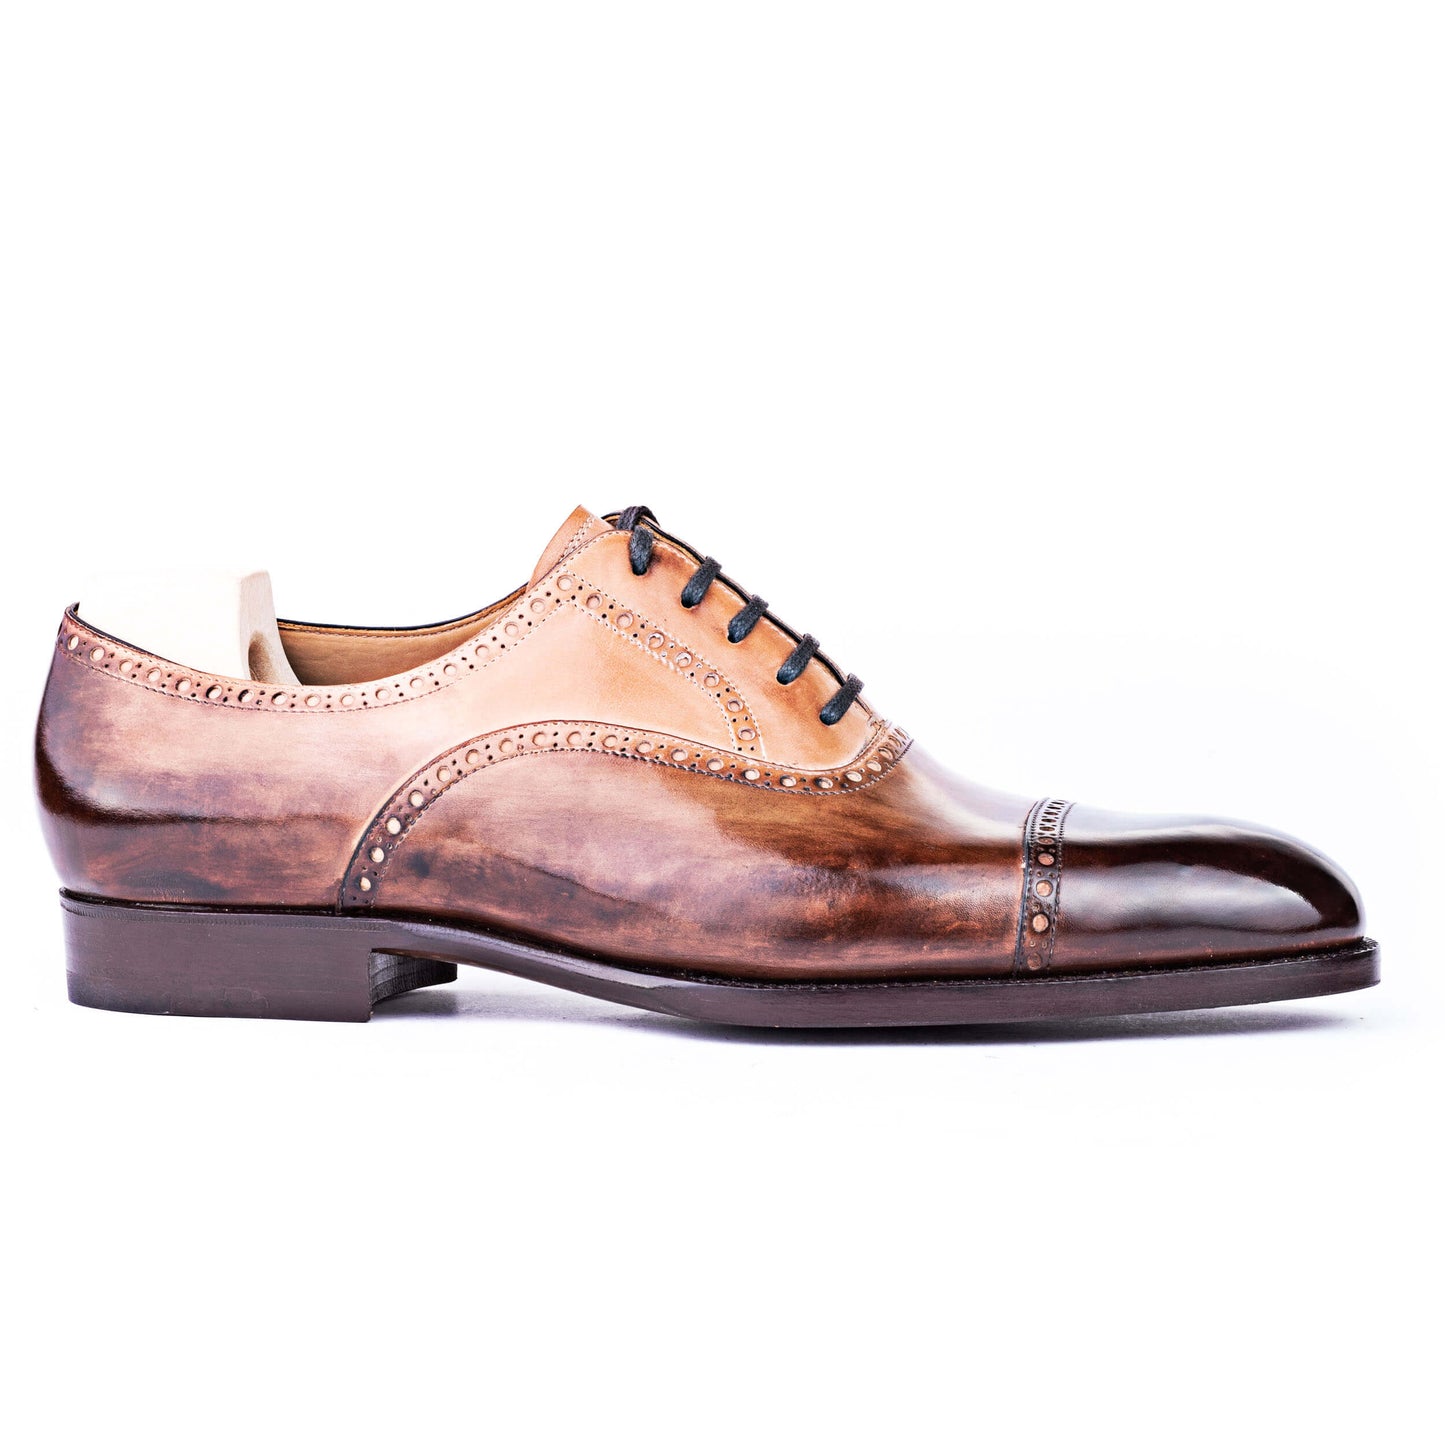 Straight toe cap Oxford with vamp, counter and topline brogueing